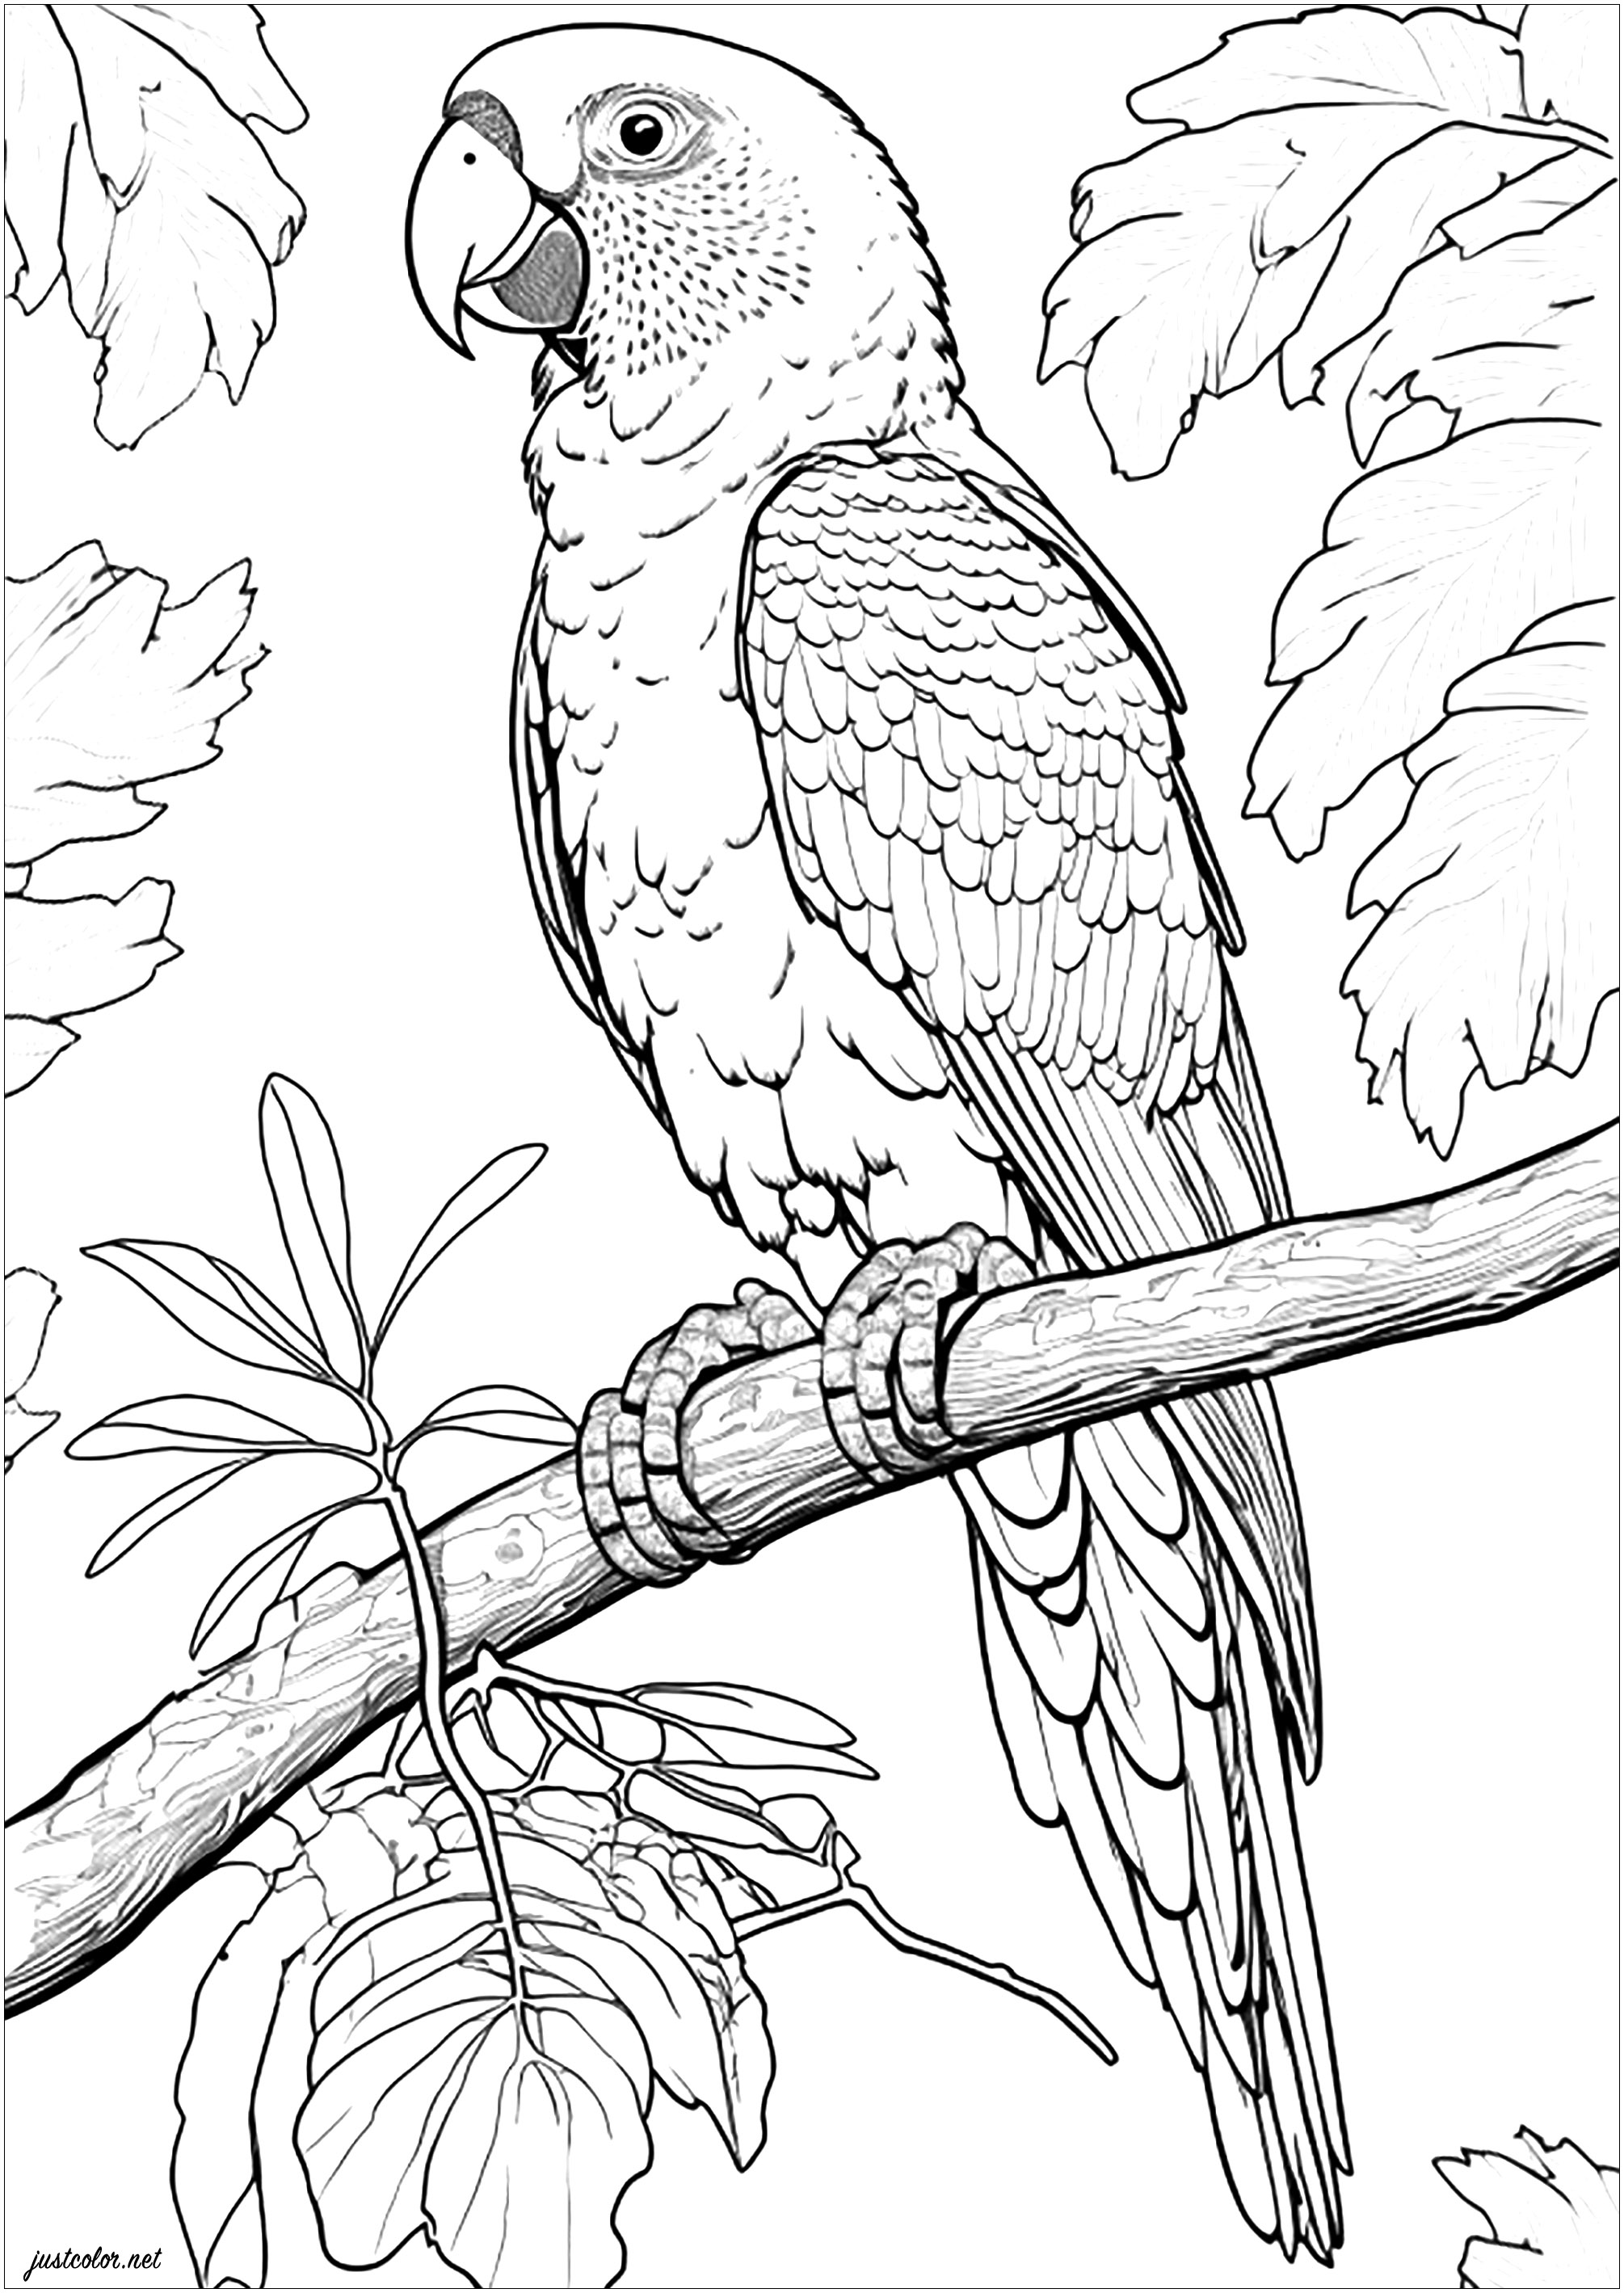 Realistic Amazon parrot - Birds Adult Coloring Pages